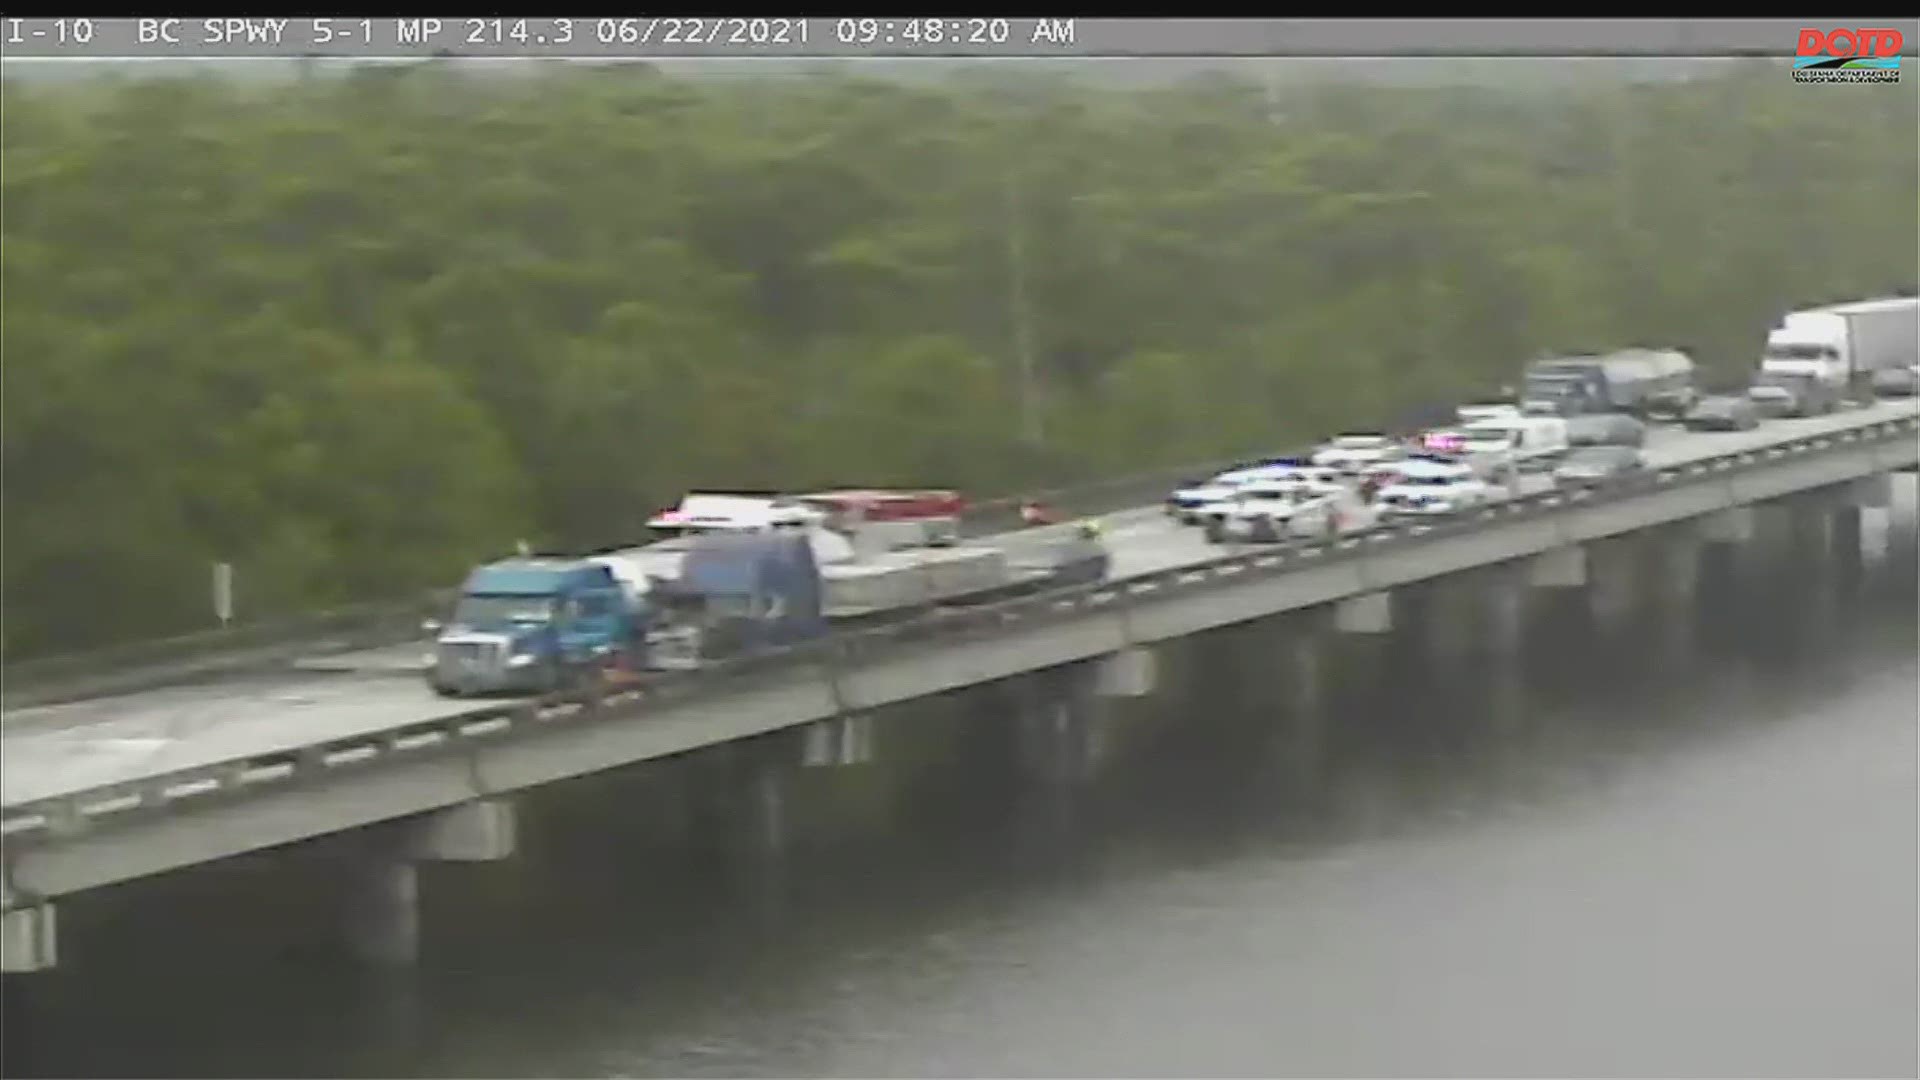 A crash between a couple of 18-wheel trucks closed eastbound I-10 near the spillway Tuesday for several hours.